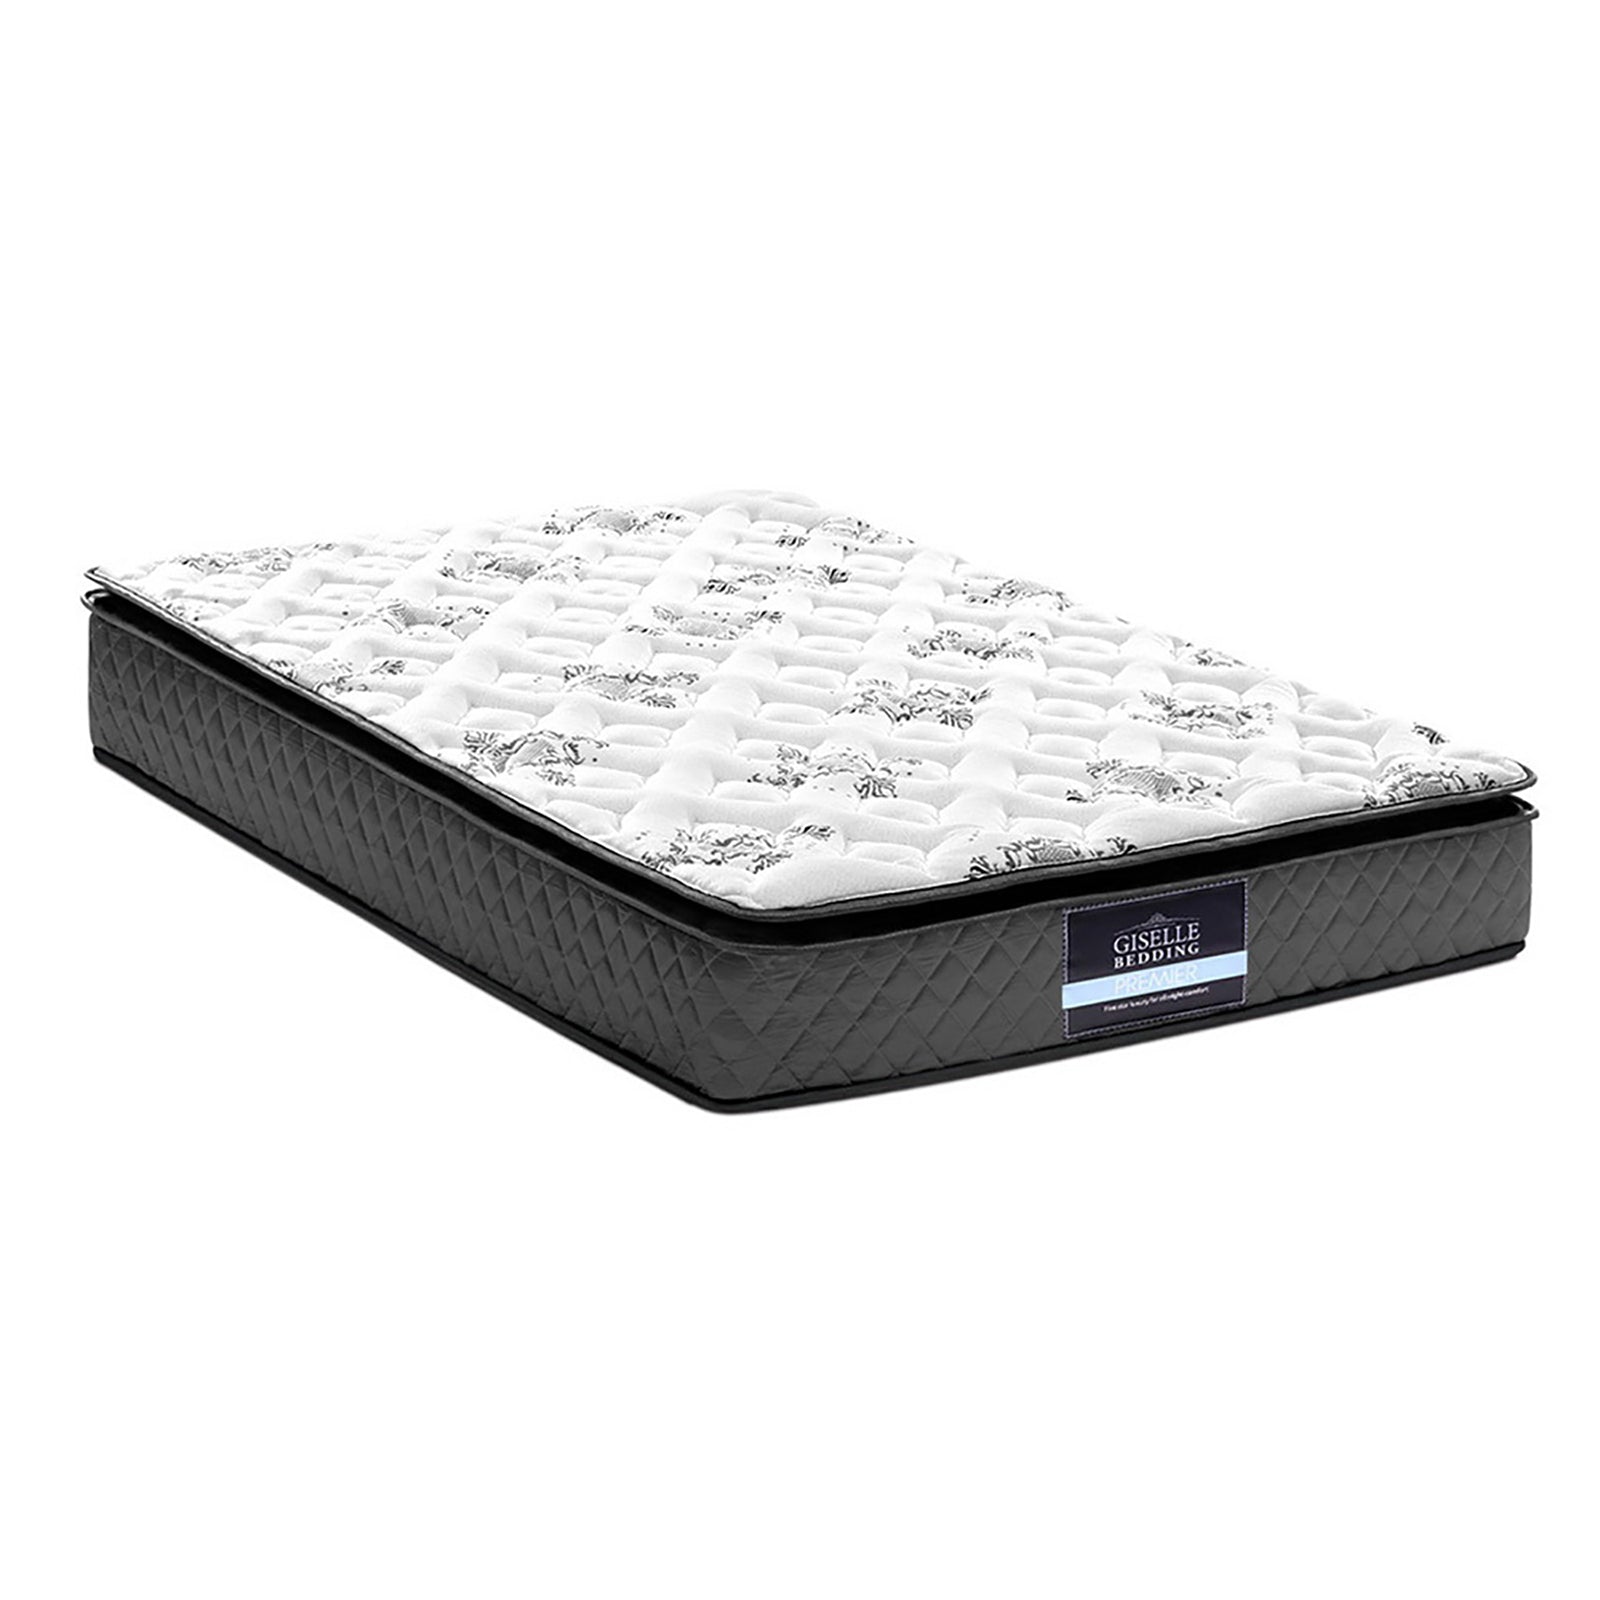 Giselle Bedding Rocco Bonnell Spring Mattress 24cm Thick – Single